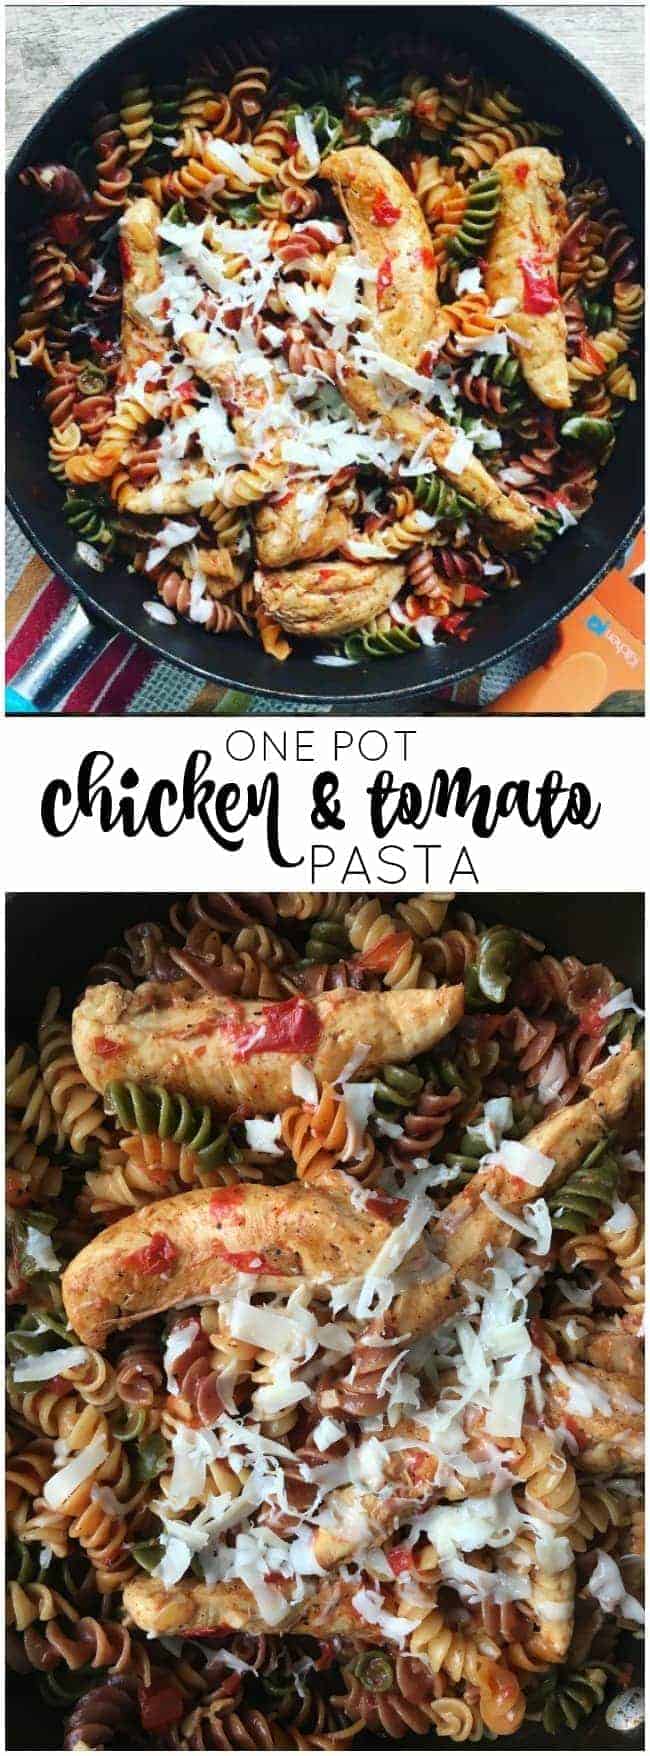 Fast Food Friday - One Pot Chicken Tomato Pasta